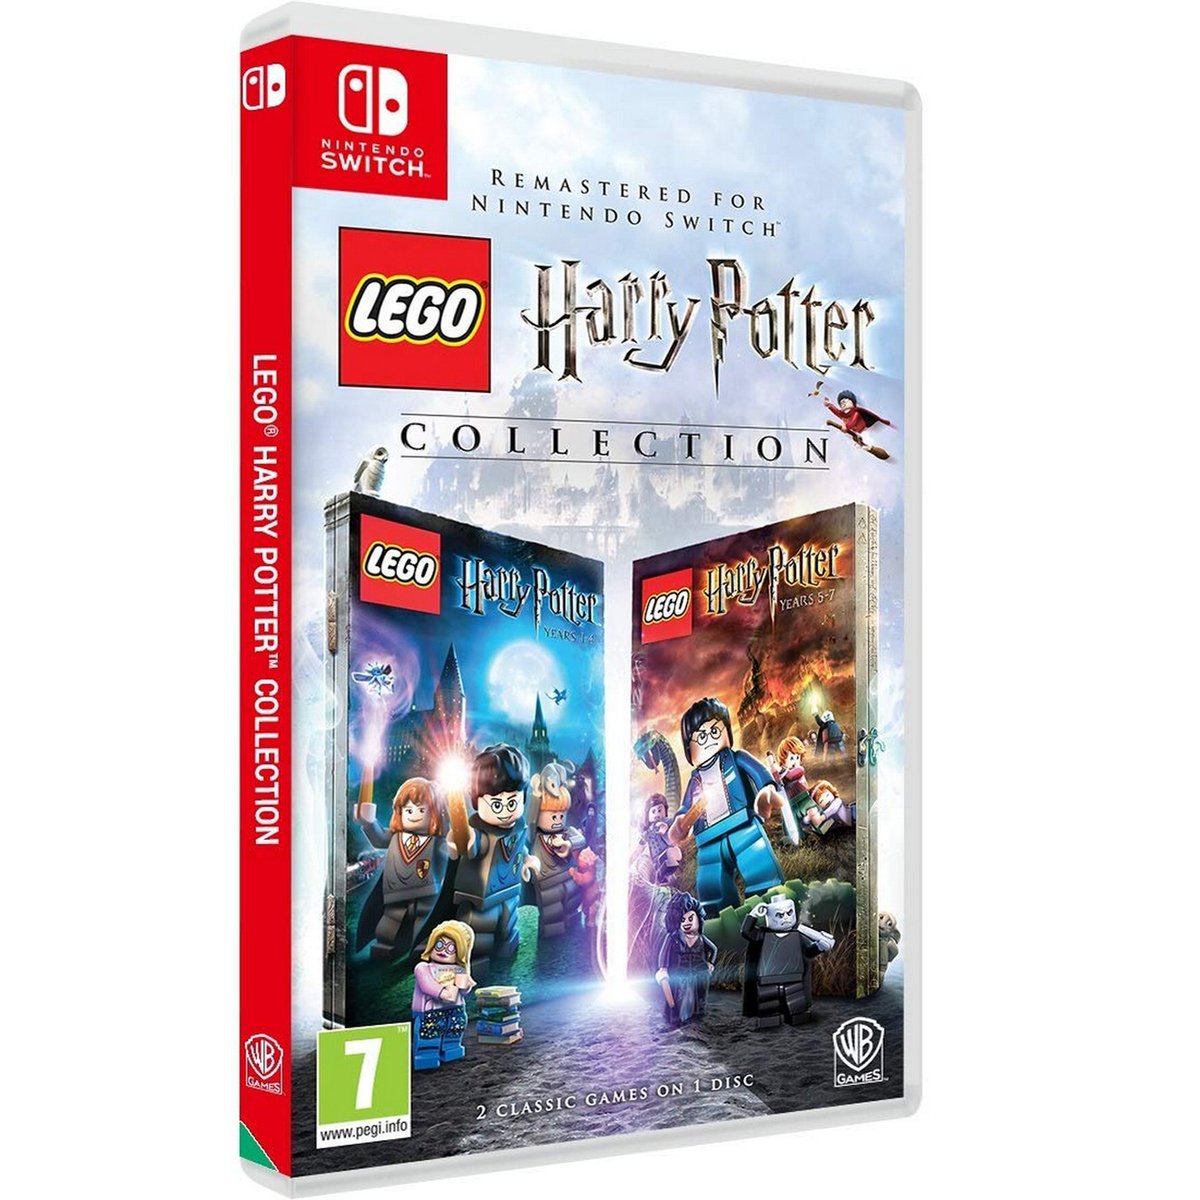 Nintendo Switch LEGO Harry Potter Collection